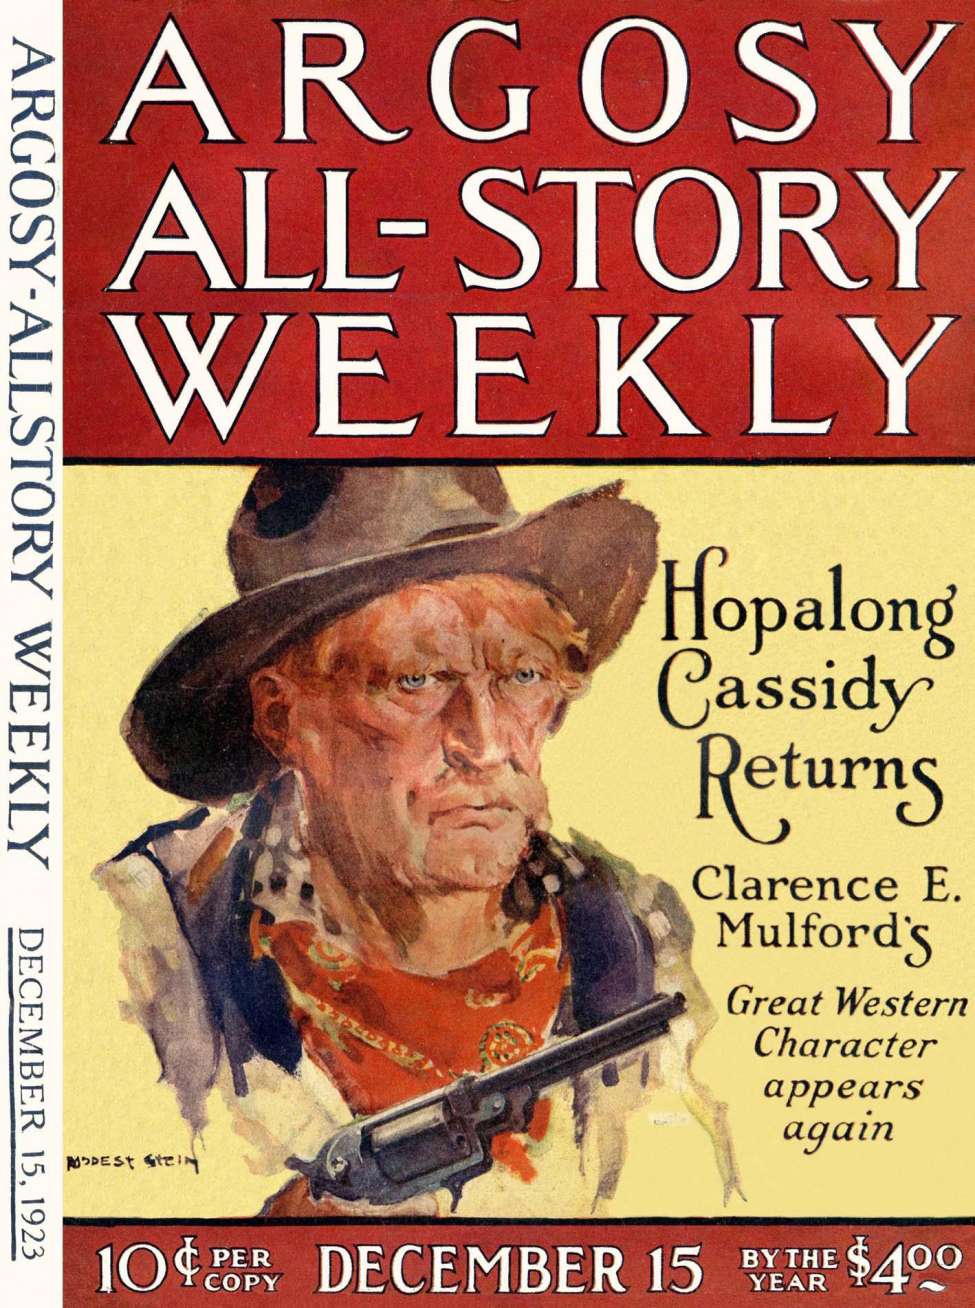 Book Cover For Argosy All-Story Weekly v156 1